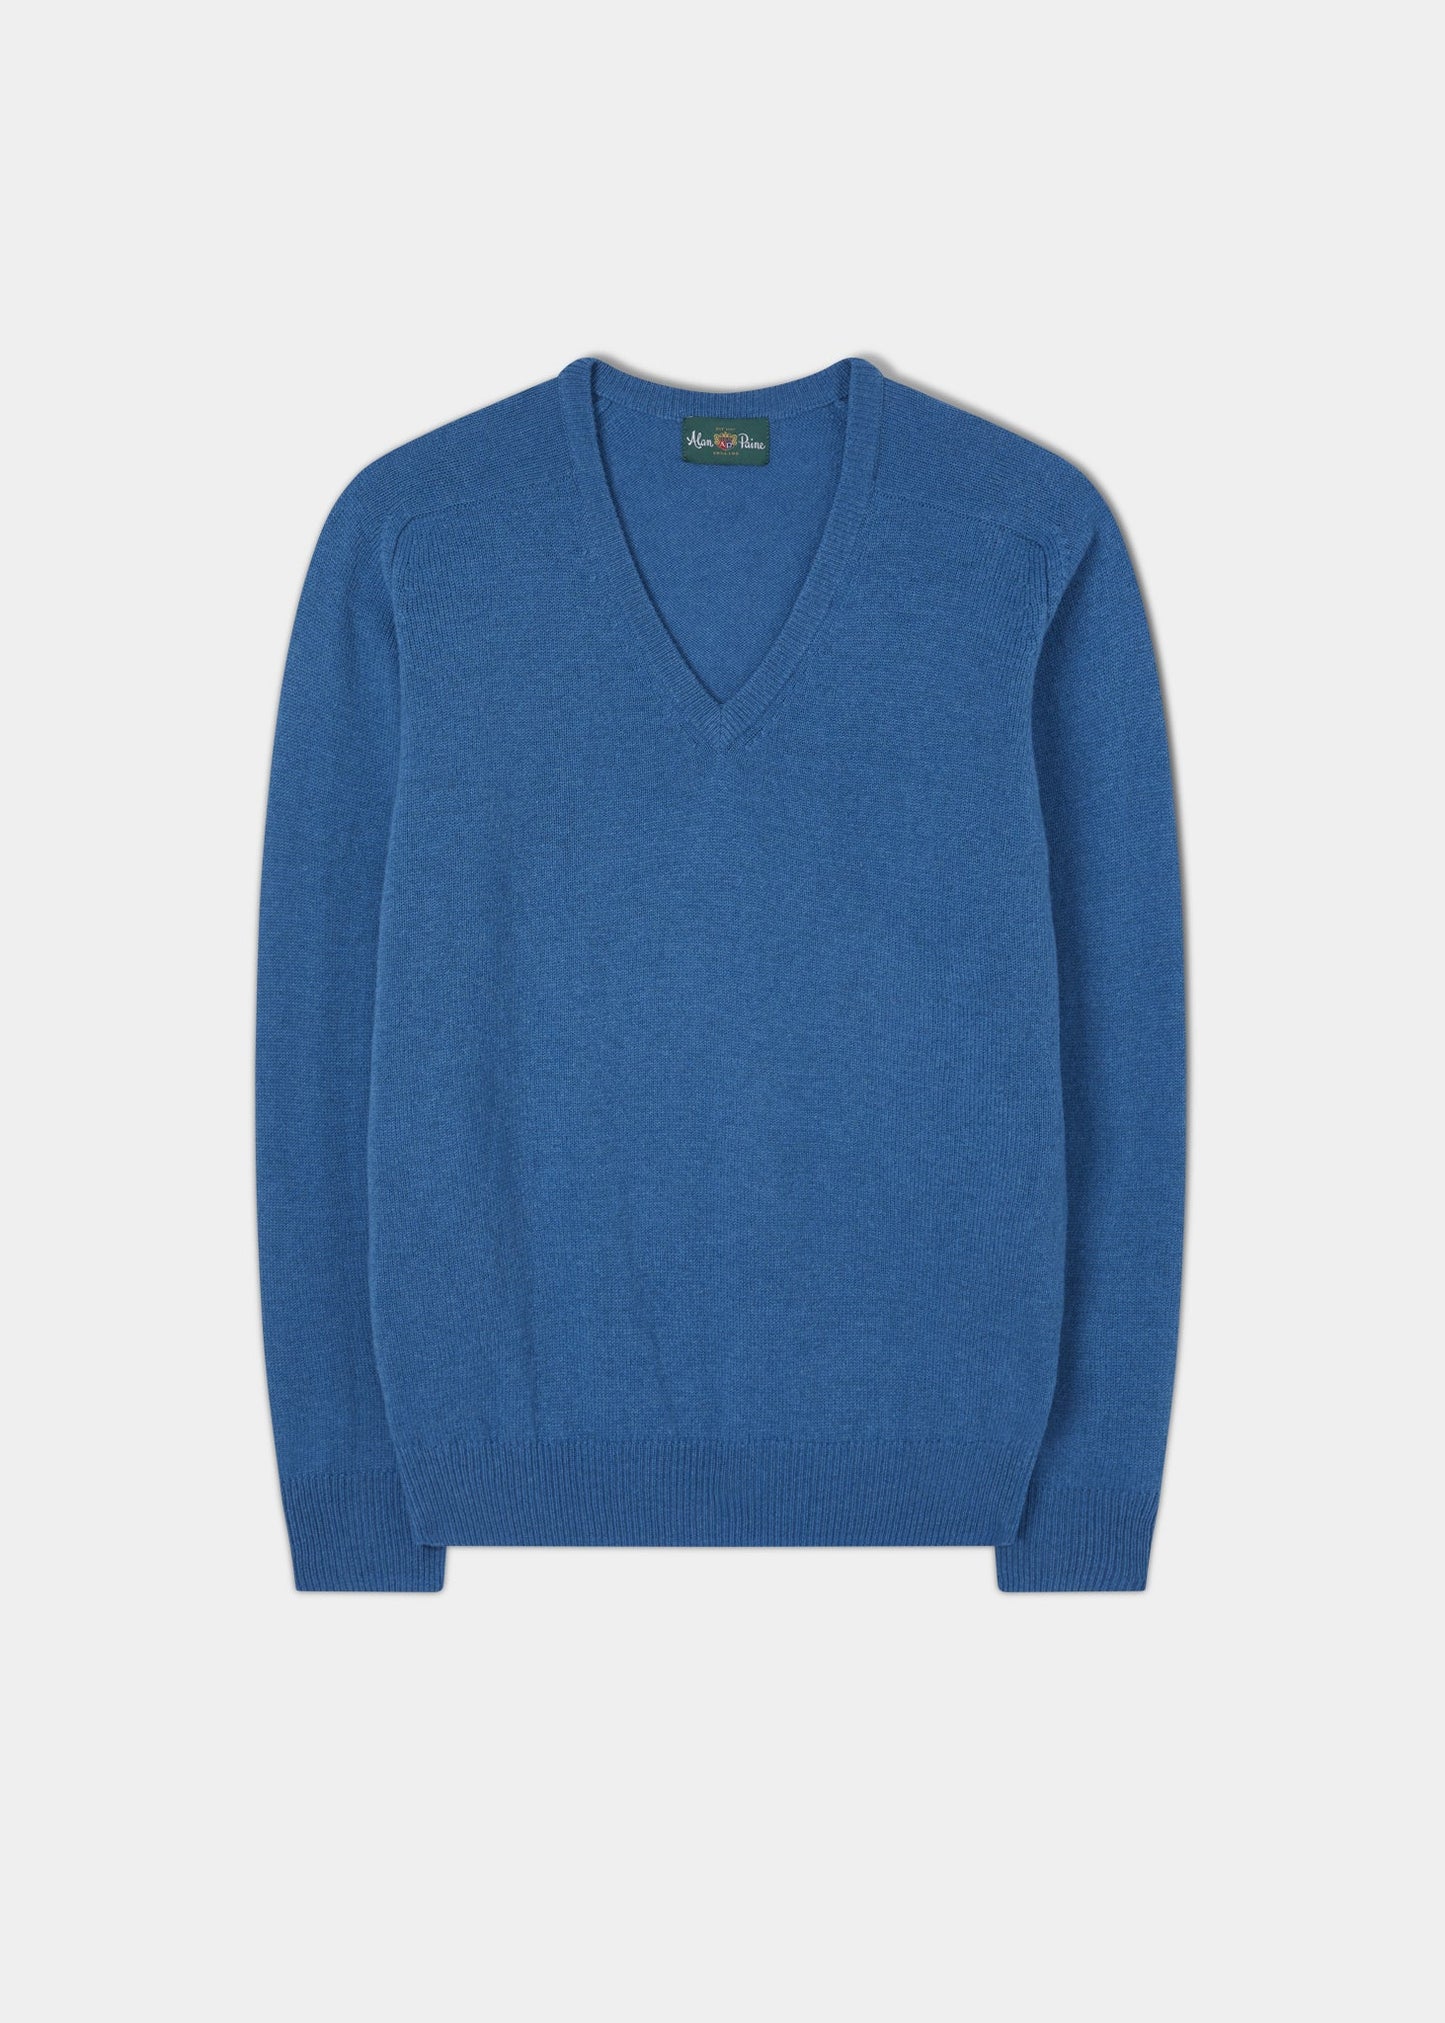 Hampshire Lambswool Jumper in Teal Blue